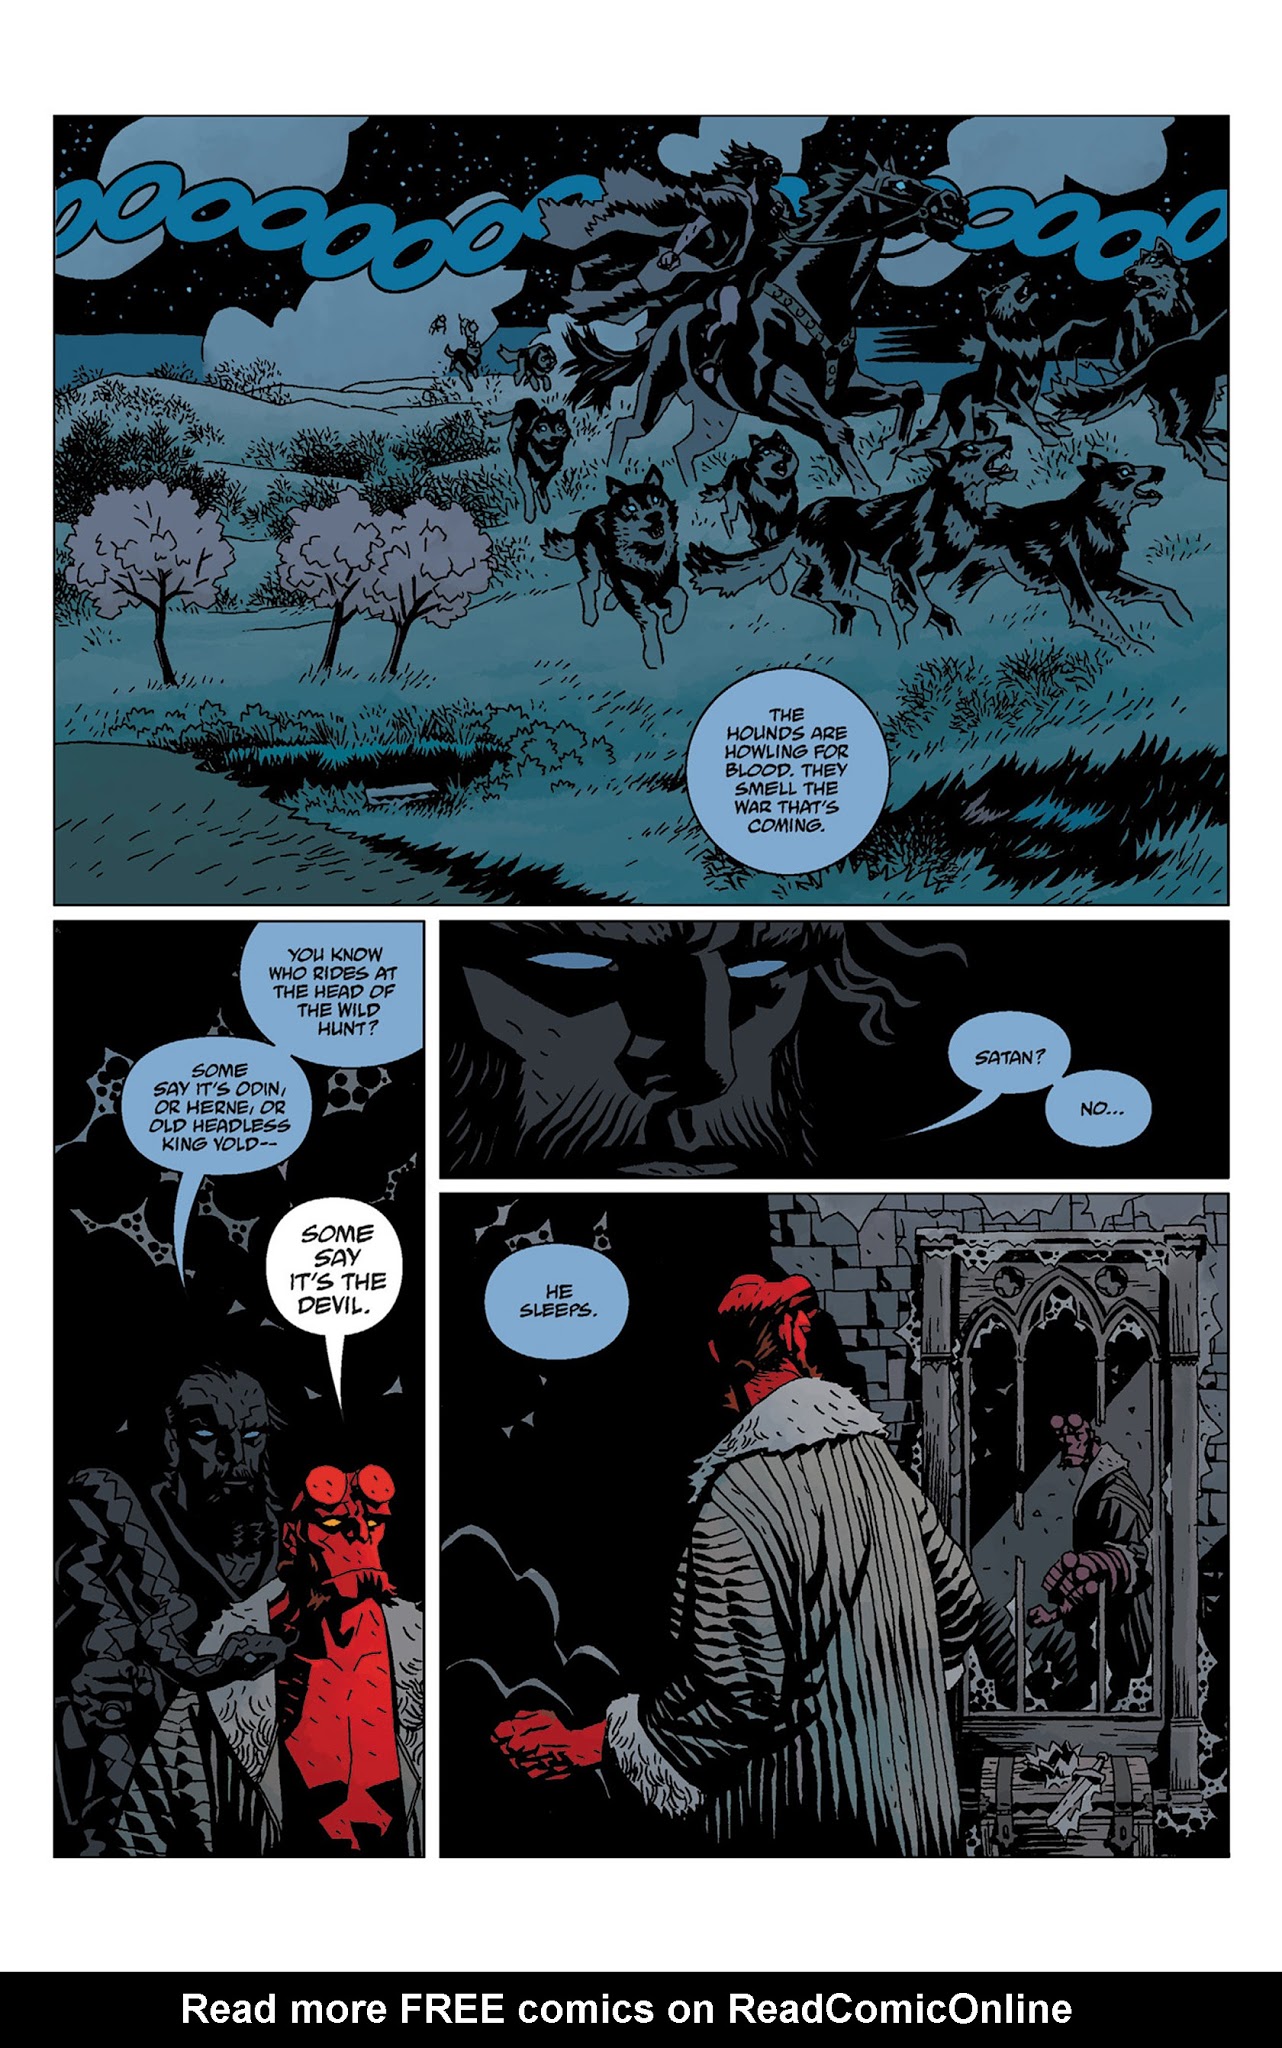 Read online Hellboy: The Wild Hunt comic -  Issue # TPB - 144